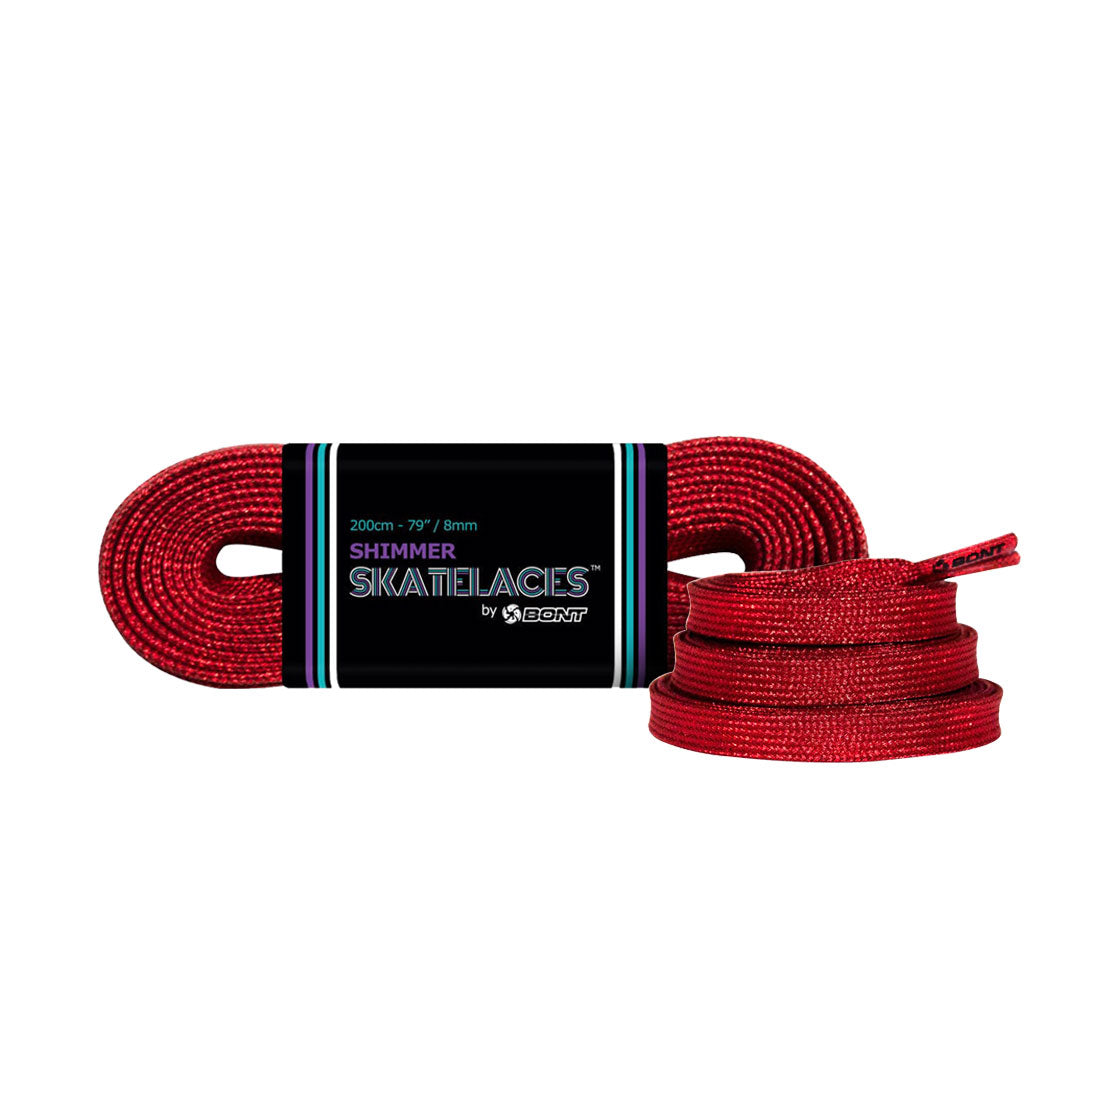 Bont Shimmer 8mm Laces - 275cm/108in Very Cherry Red Laces